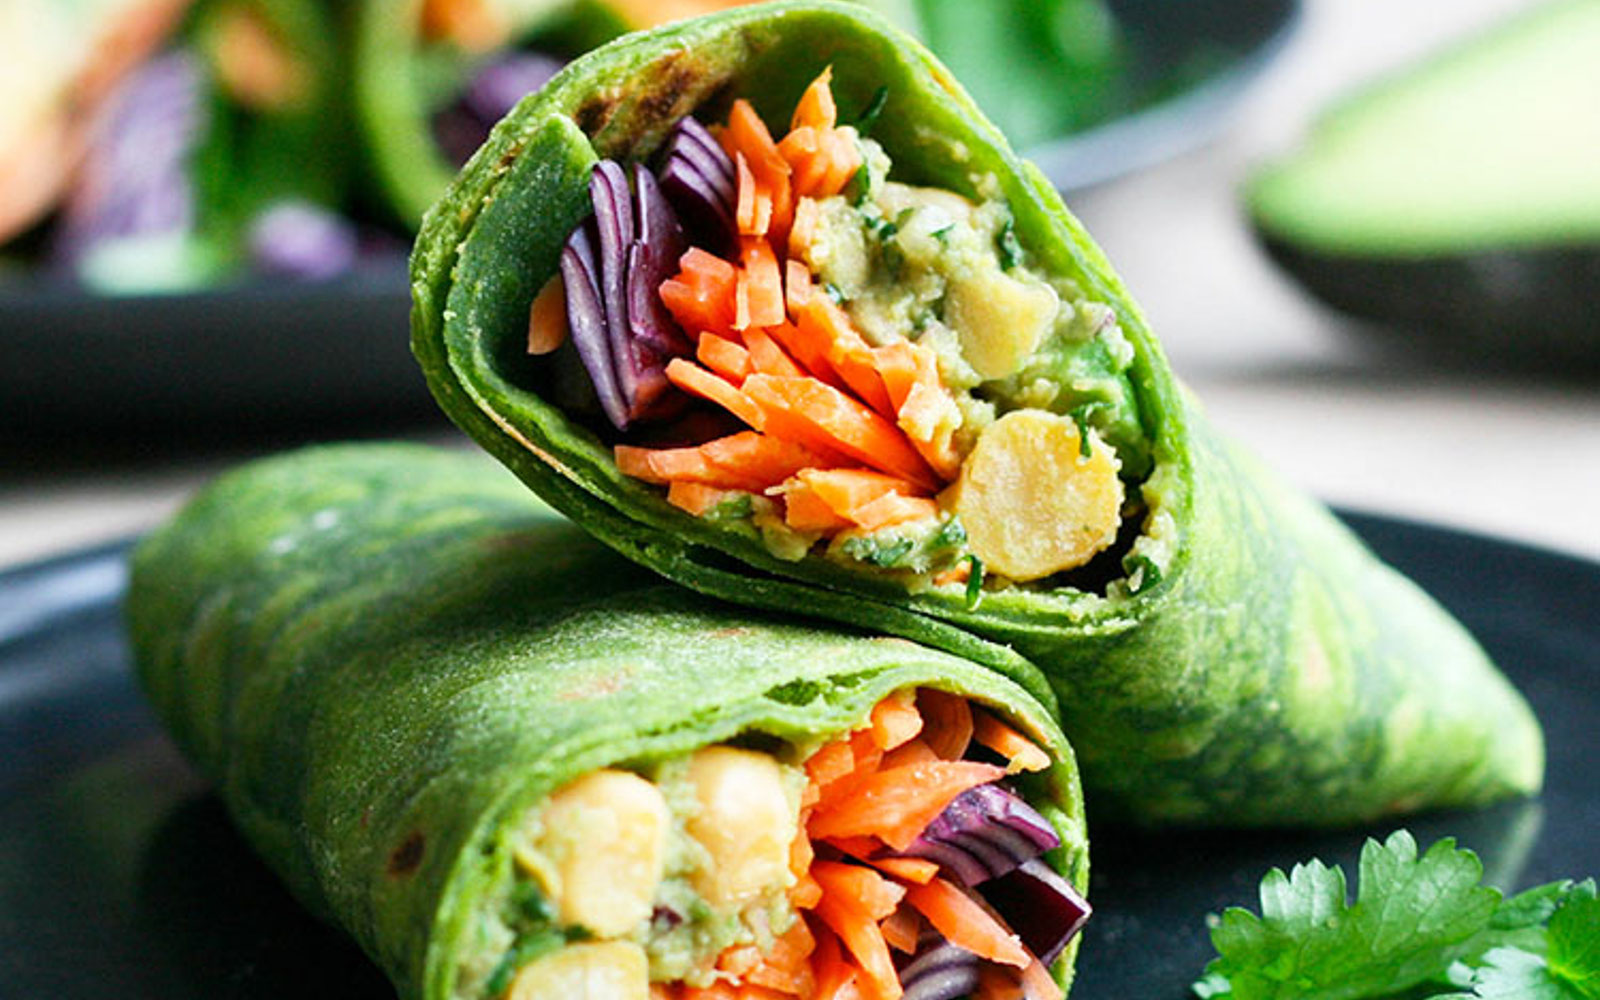 Avocado and Chickpea Spinach Wraps